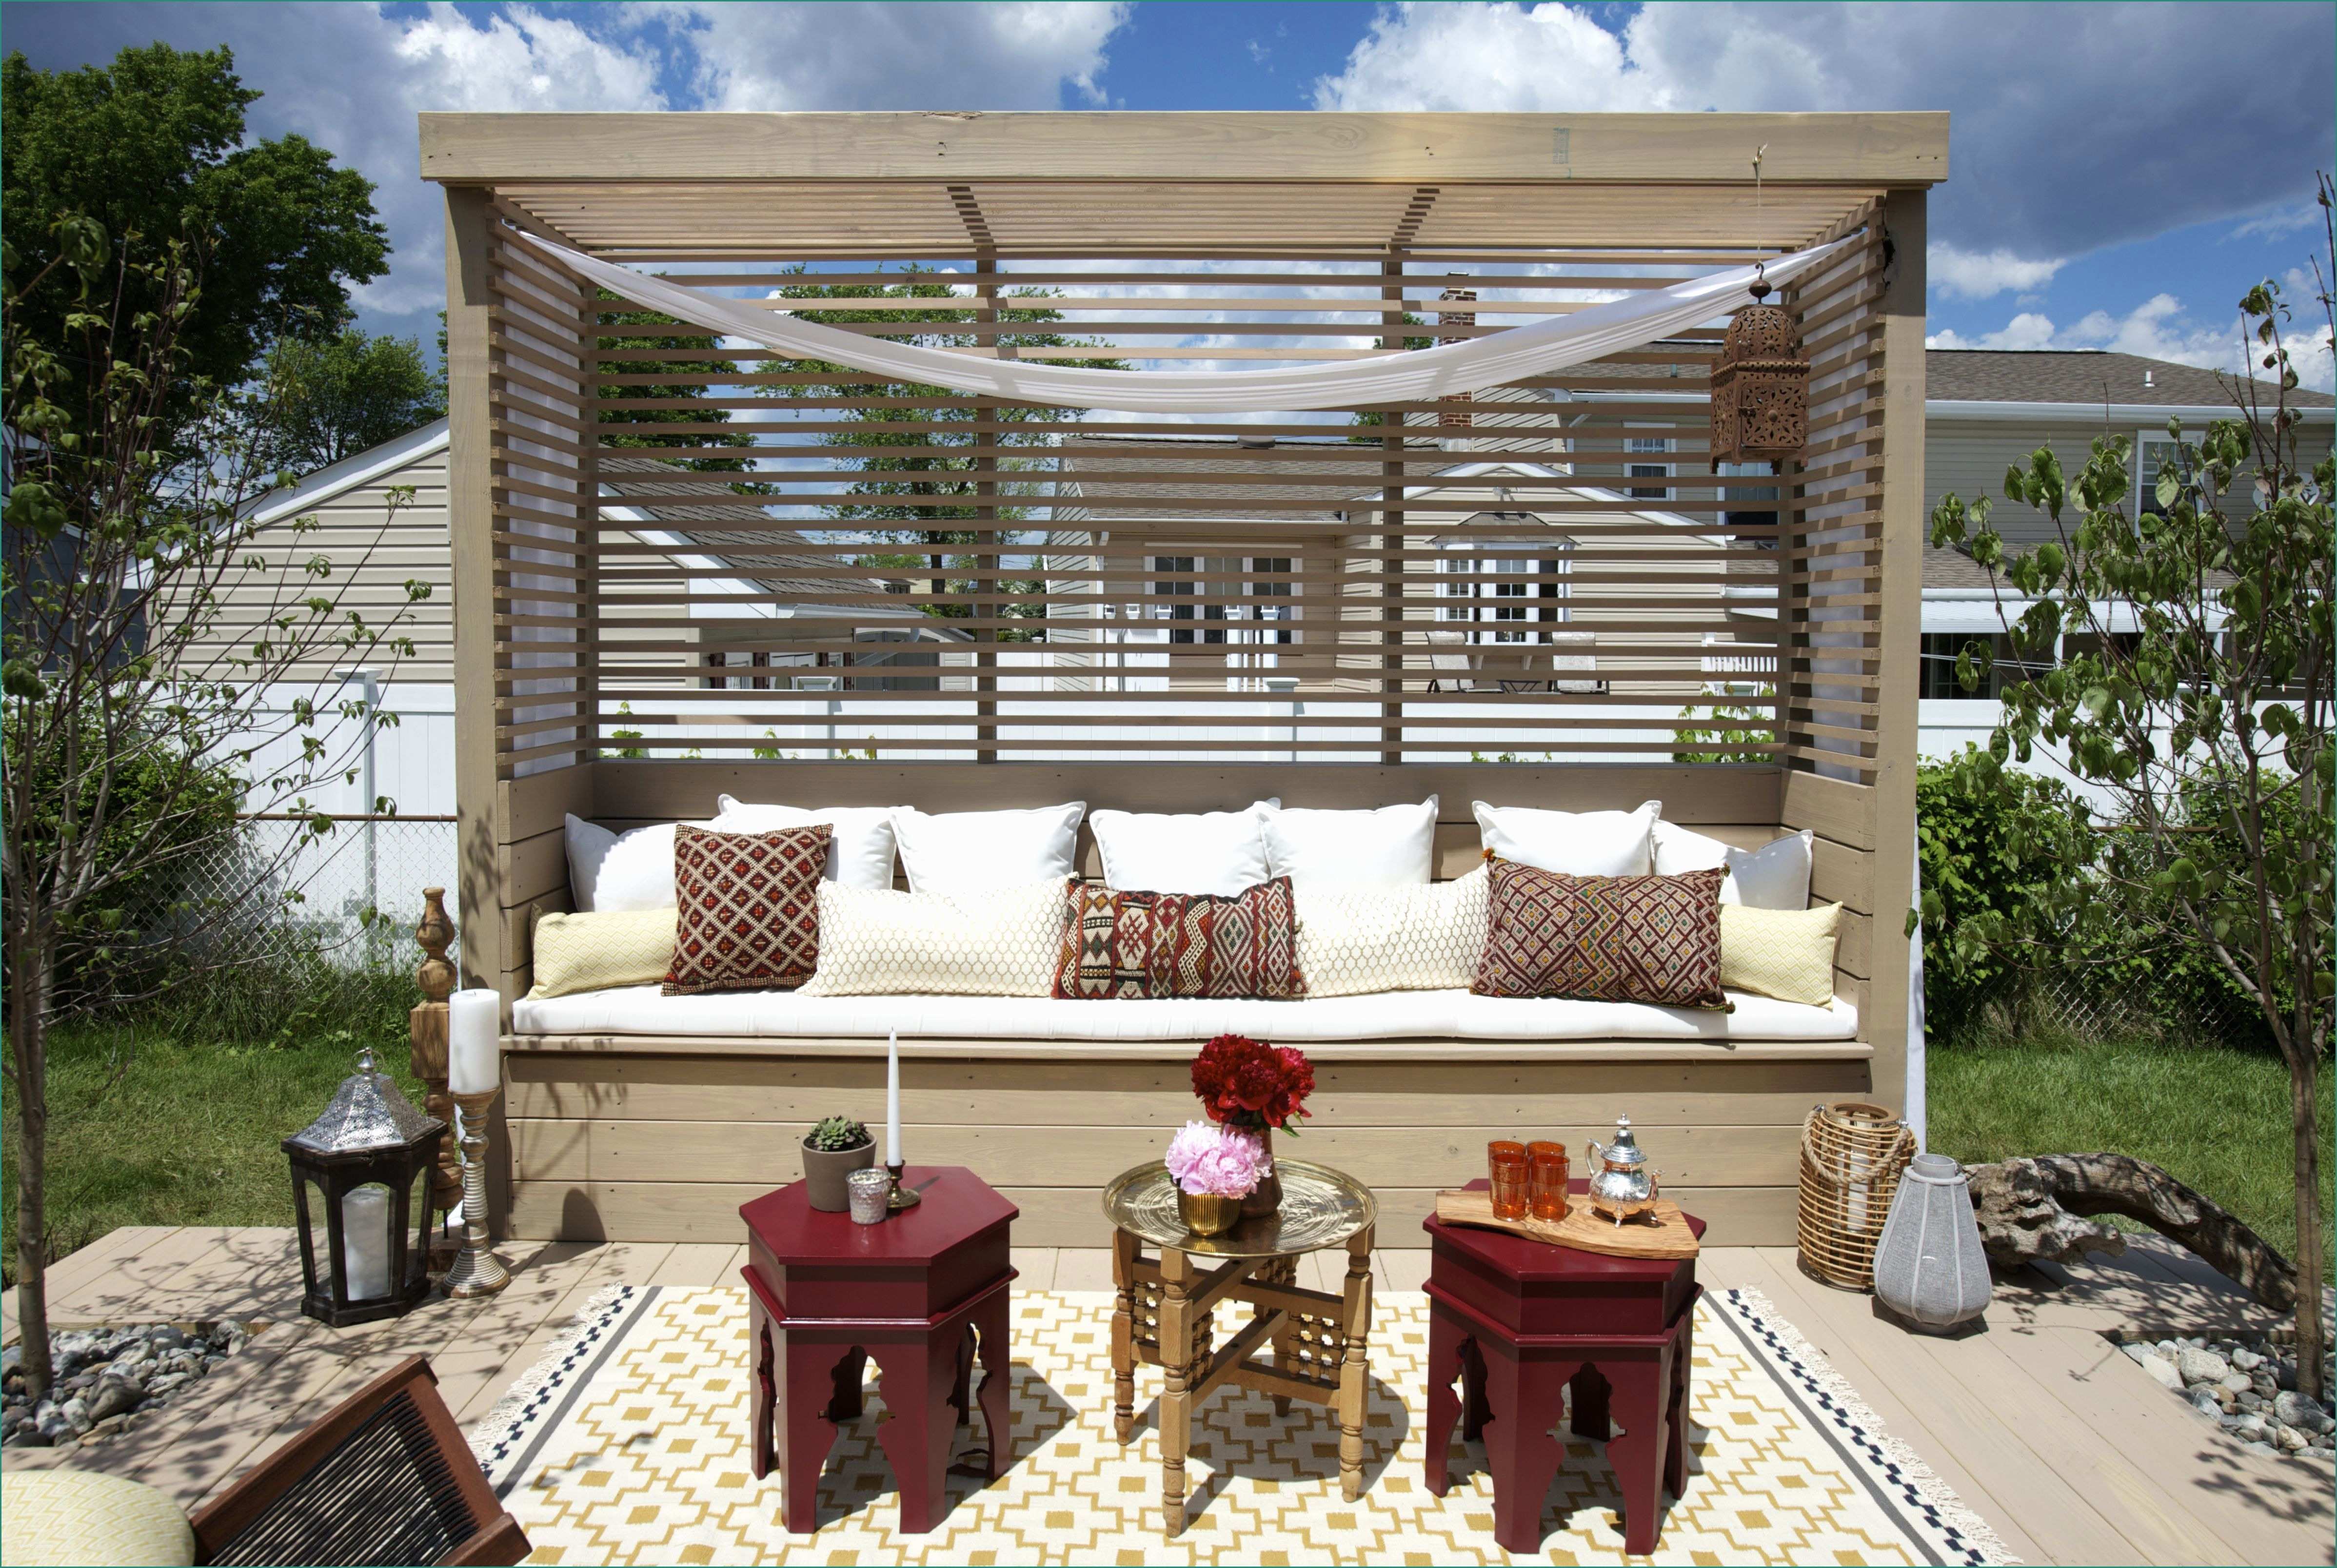 Casa Idea Stile E for the Back Deck We took Our Style Cue From Morocco